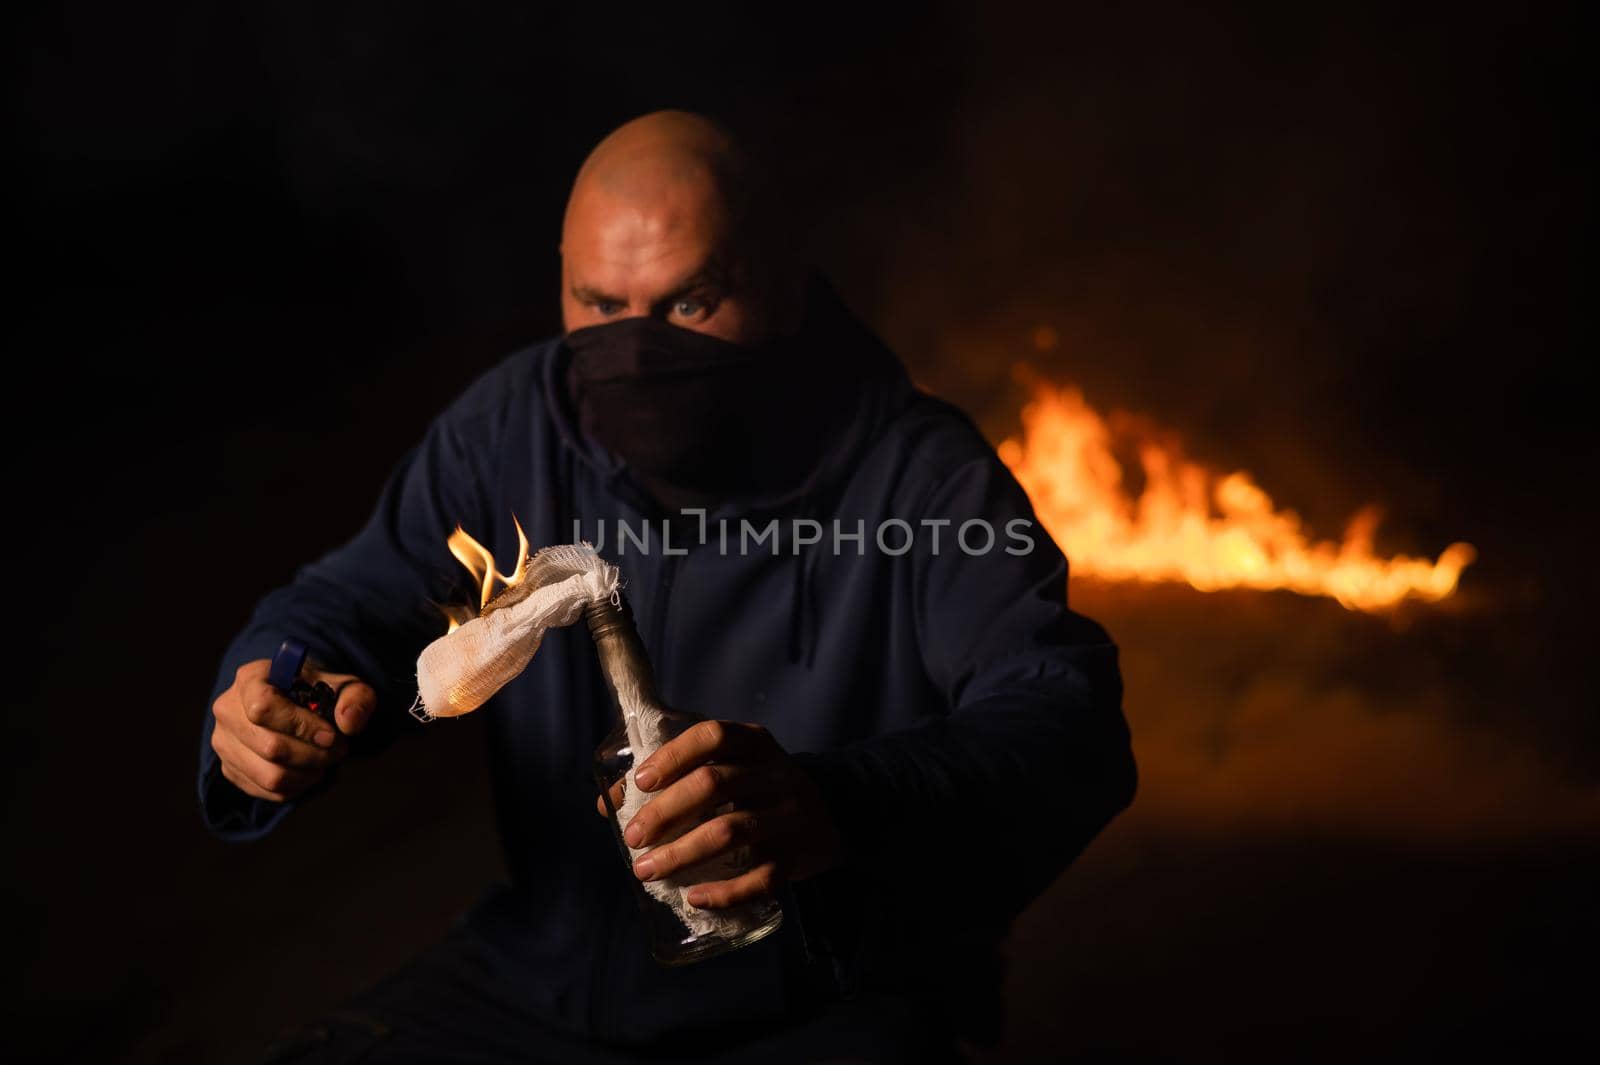 A masked man is holding a burning bottle. Molotov cocktail